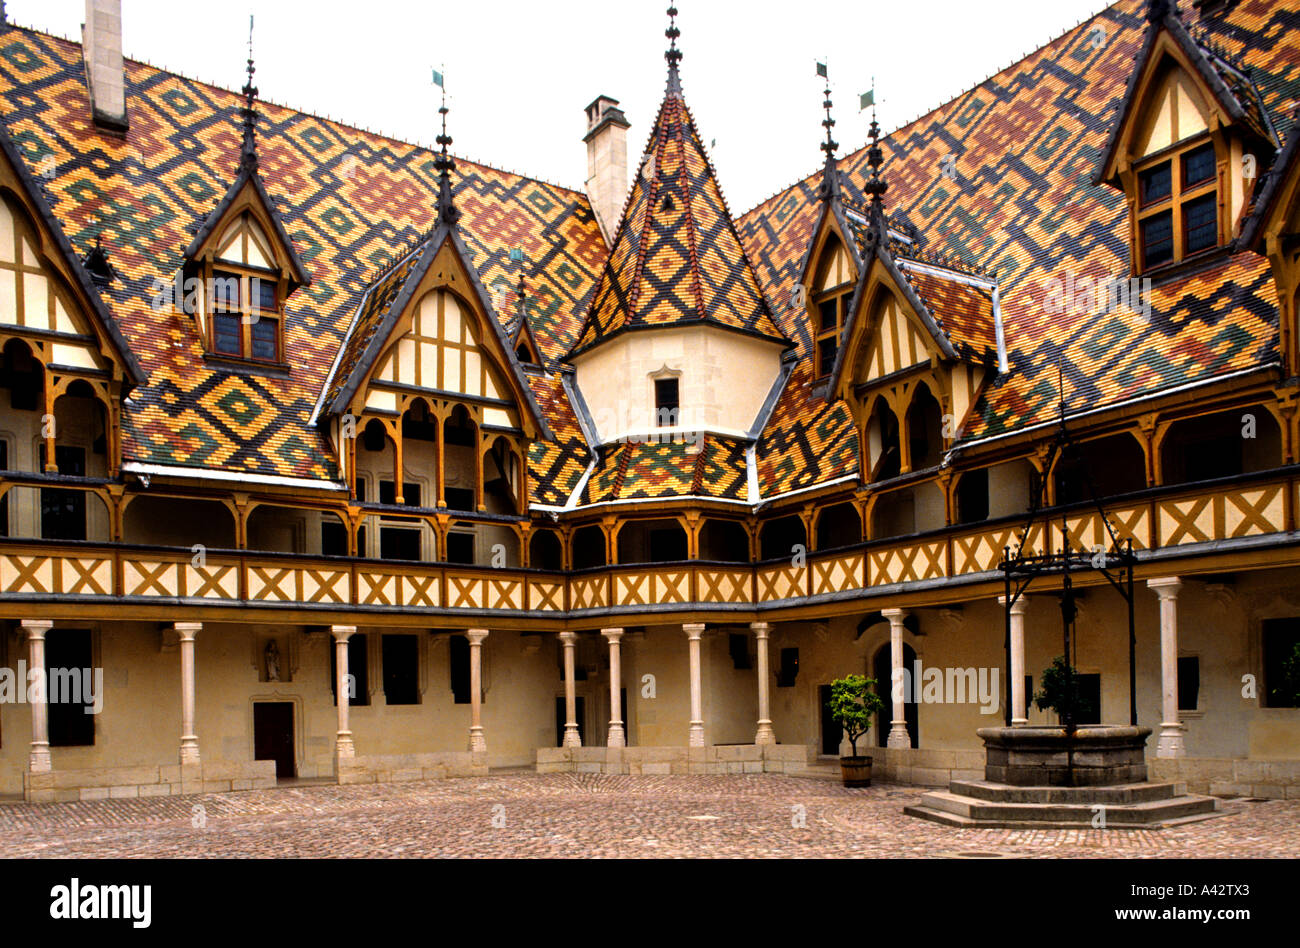 The Hotel Dieu hospital Beaune France French museum tiles Stock Photo